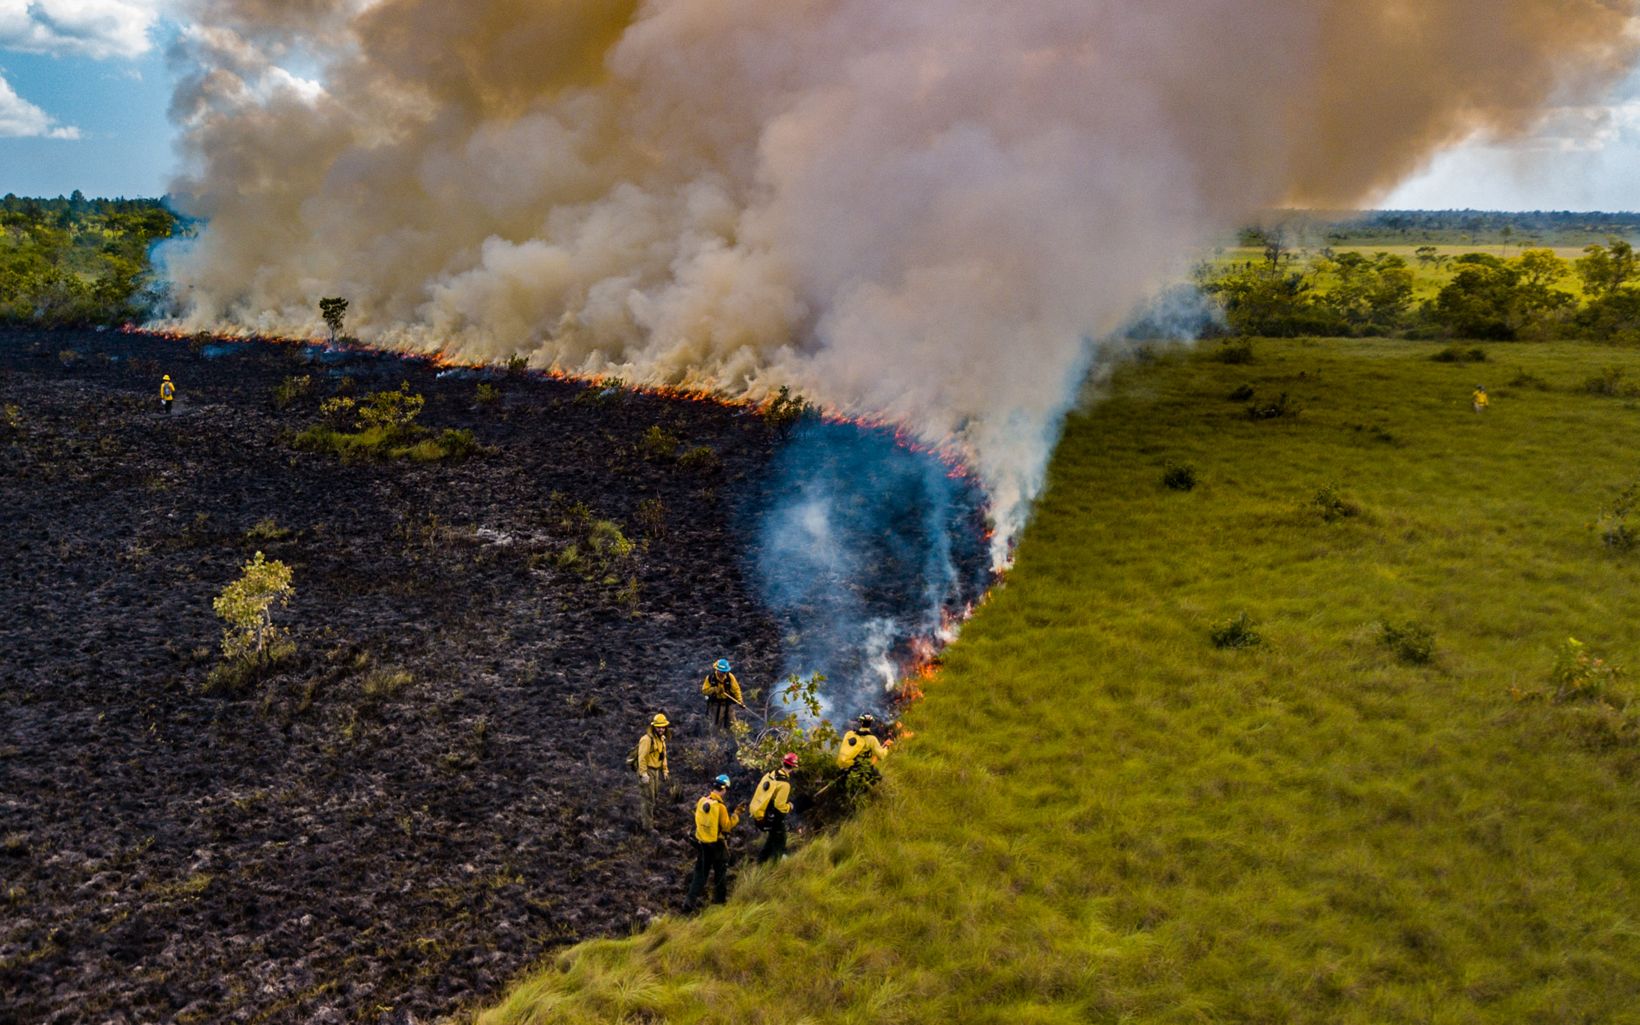 Aerial view of firefighters moving a controlled burn along the grassland in Belize. Burned ground is behind them, while smoke billows into the sky.